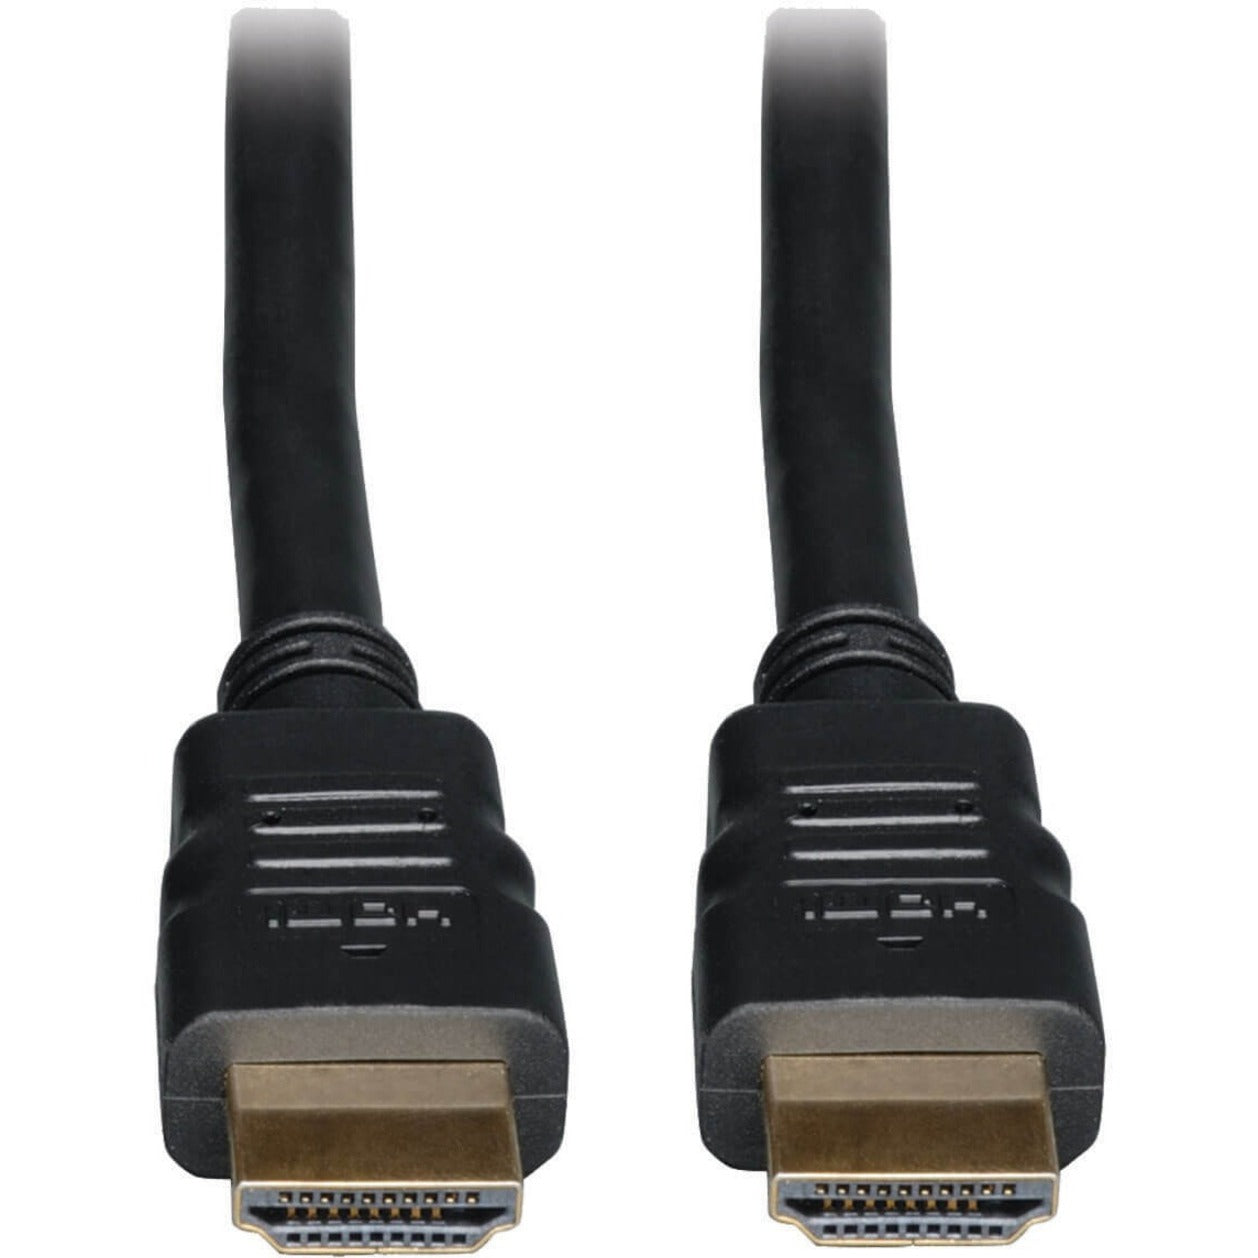 Tripp Lite P569-006-CL2 HDMI Audio/Video Cable with Ethernet, 6 ft, Gold-Plated Connectors, 18 Gbit/s Data Transfer Rate